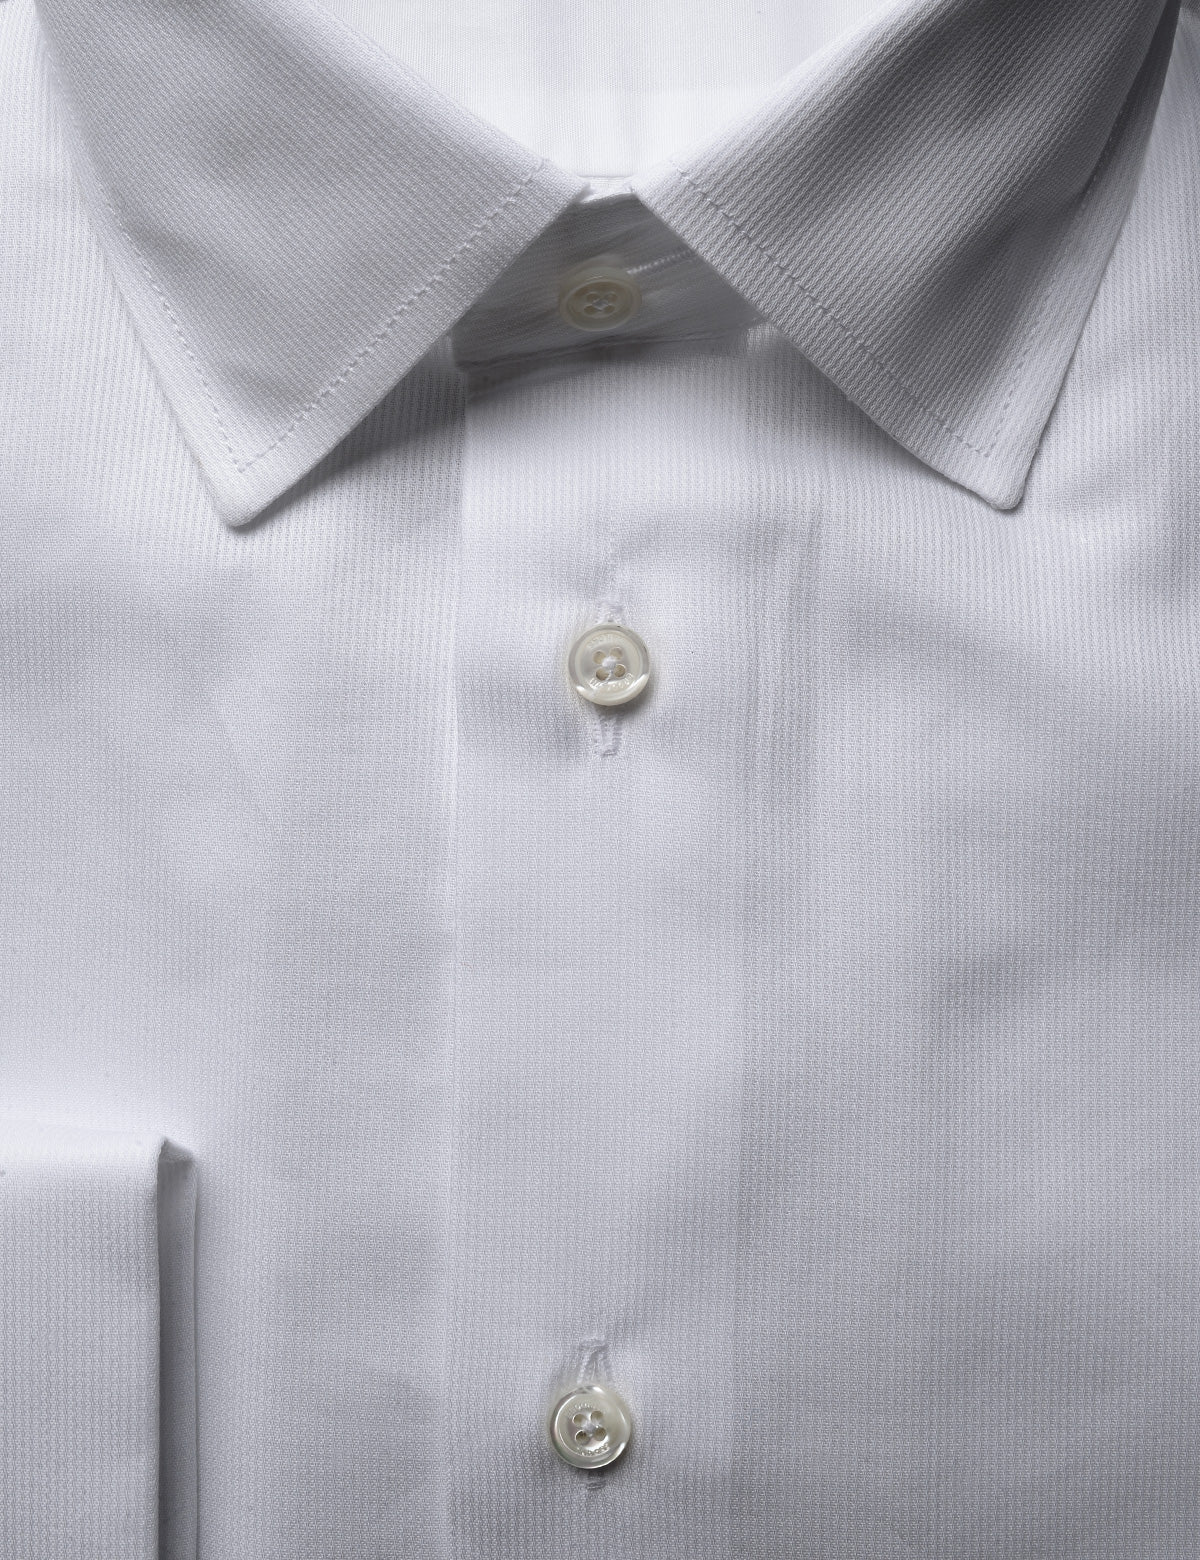 Detail showing removable button strip in place on French Cuff Tuxedo Shirt With Removeable Buttons - Bar Pique